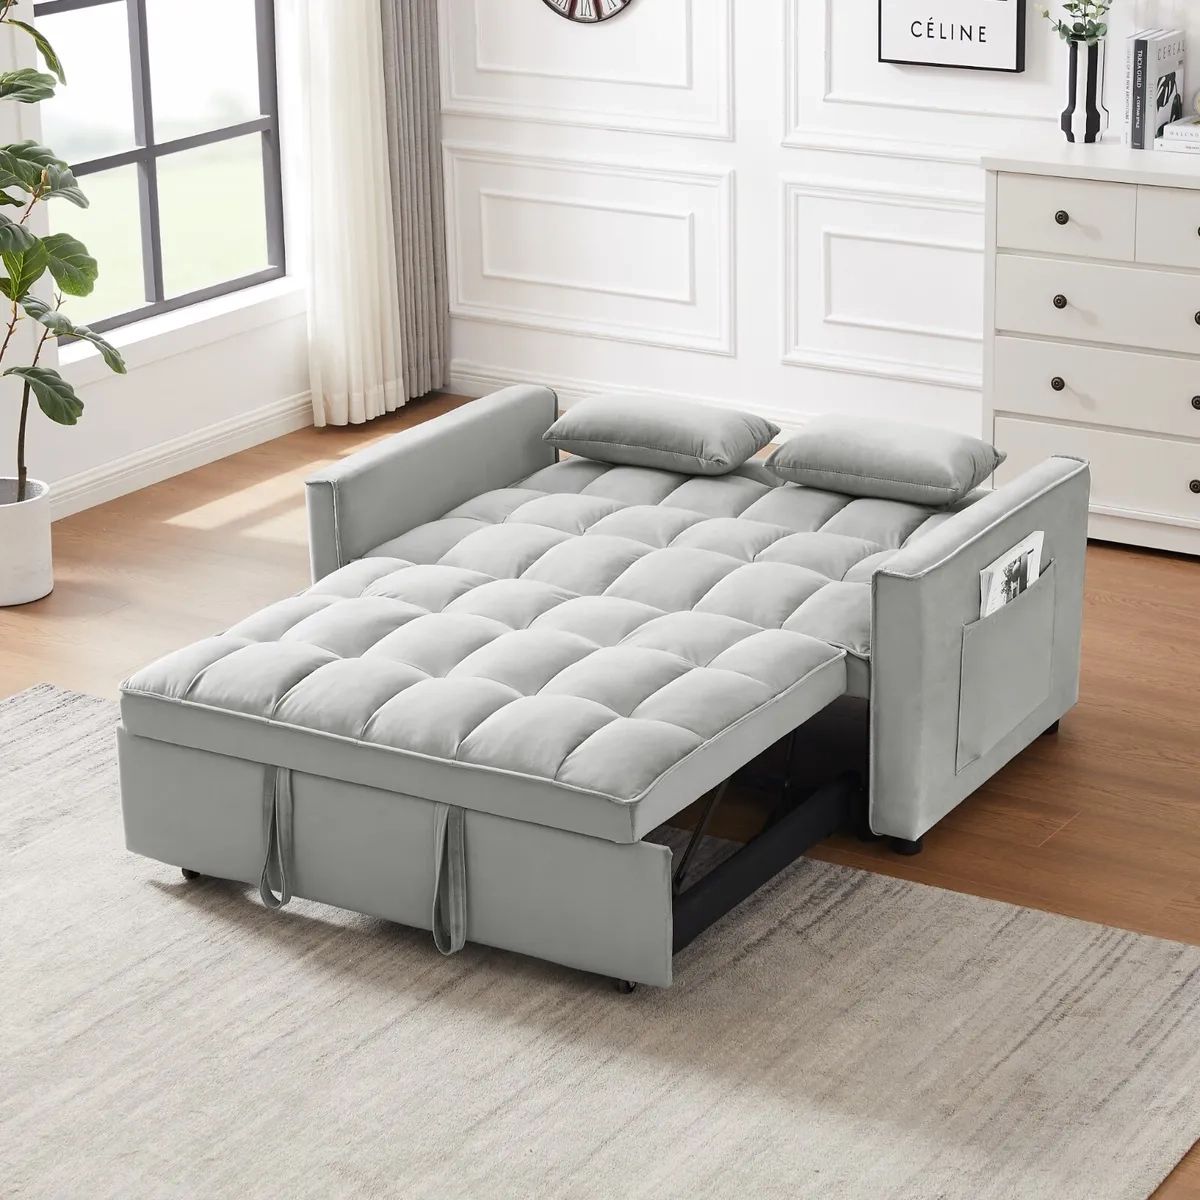 55" Convertible Sofa Bed Velvet Sleeper Loveseat Sofa Pull Out Bed W Pocket  Gray | Ebay Within Convertible Gray Loveseat Sleepers (View 14 of 15)